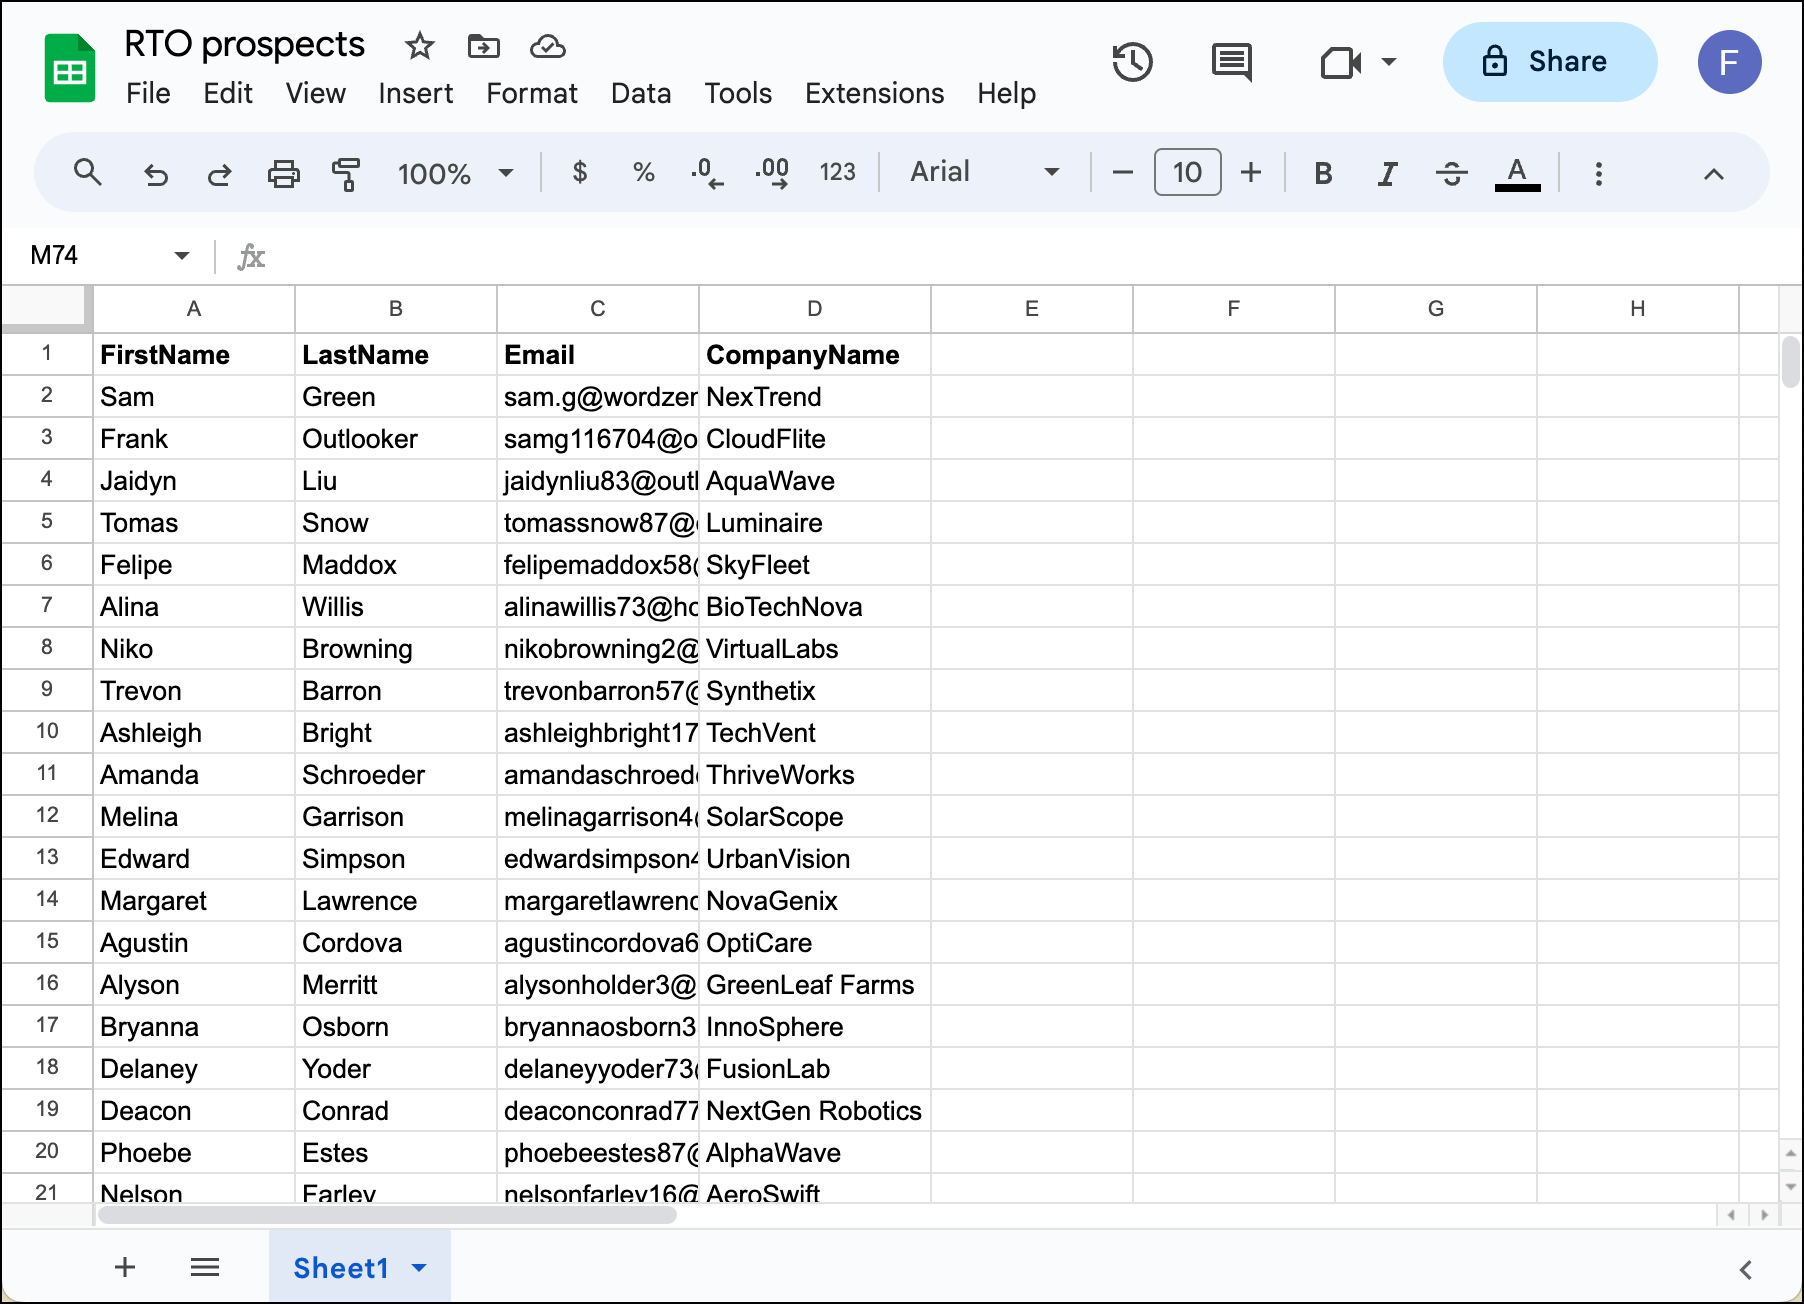 Make a Google Sheet with prospects